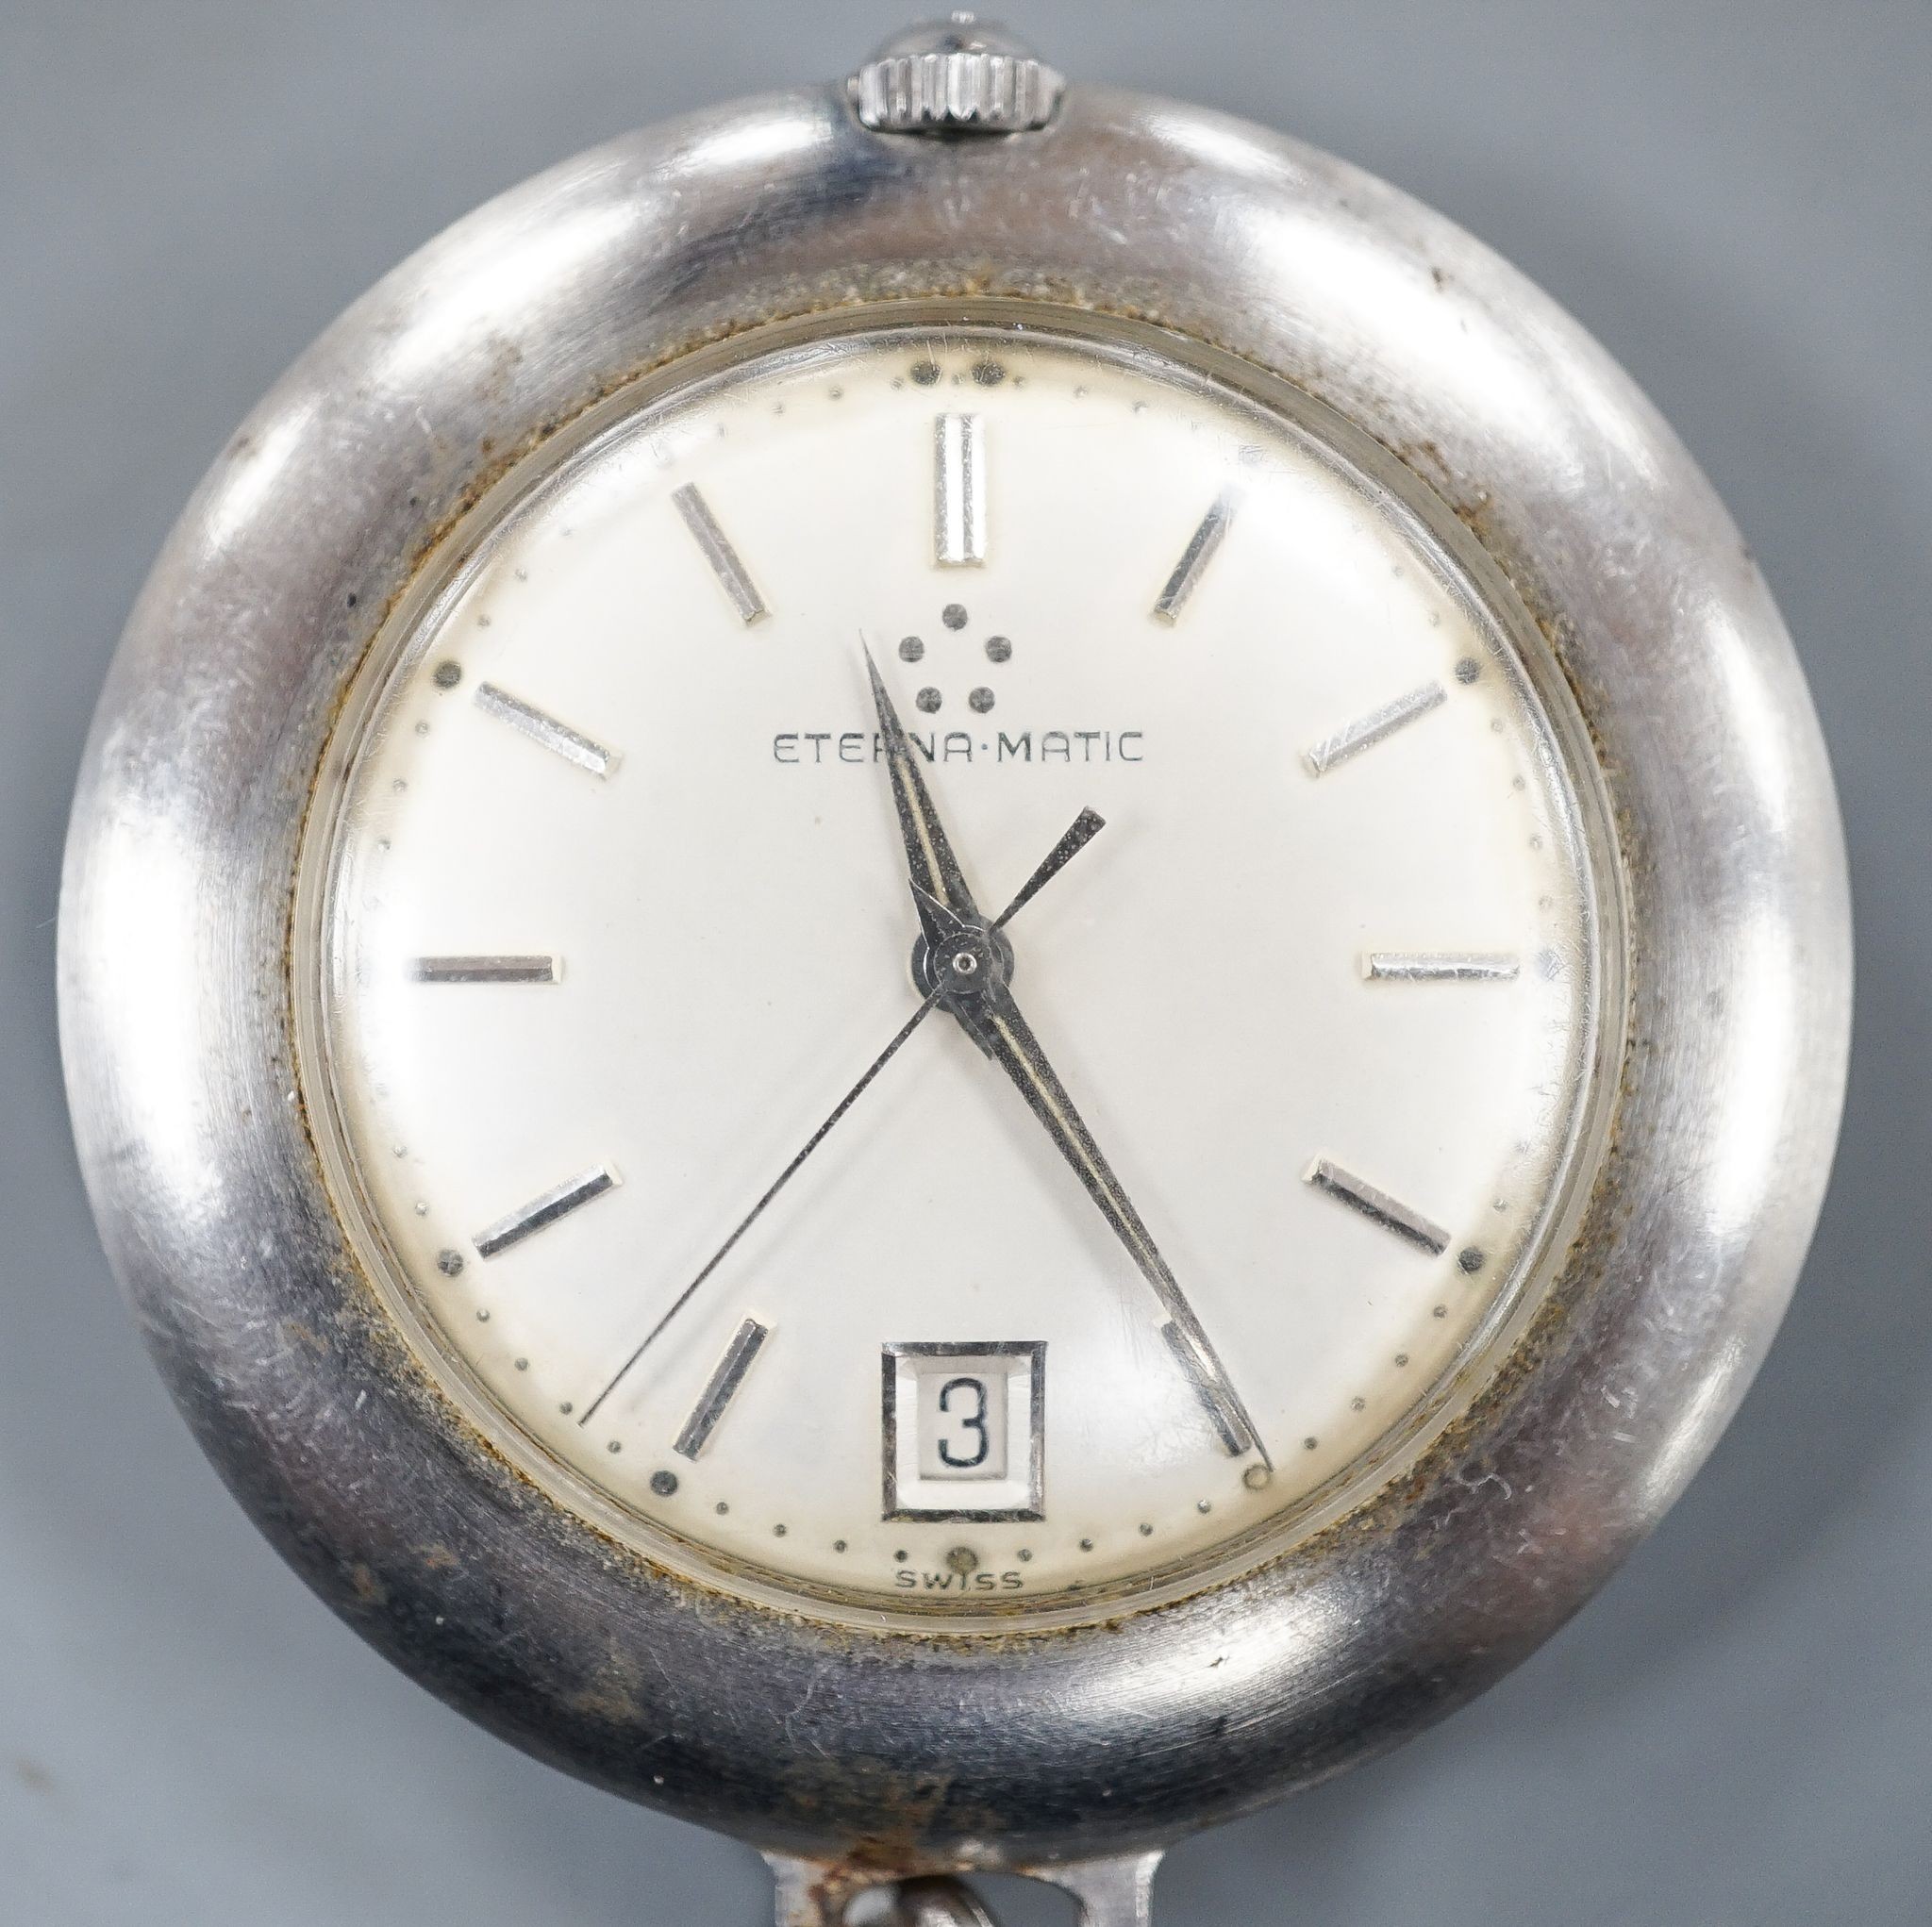 A base metal cased Eterna-matic manual wind dress pocket watch, with date aperture, on a metal chain.